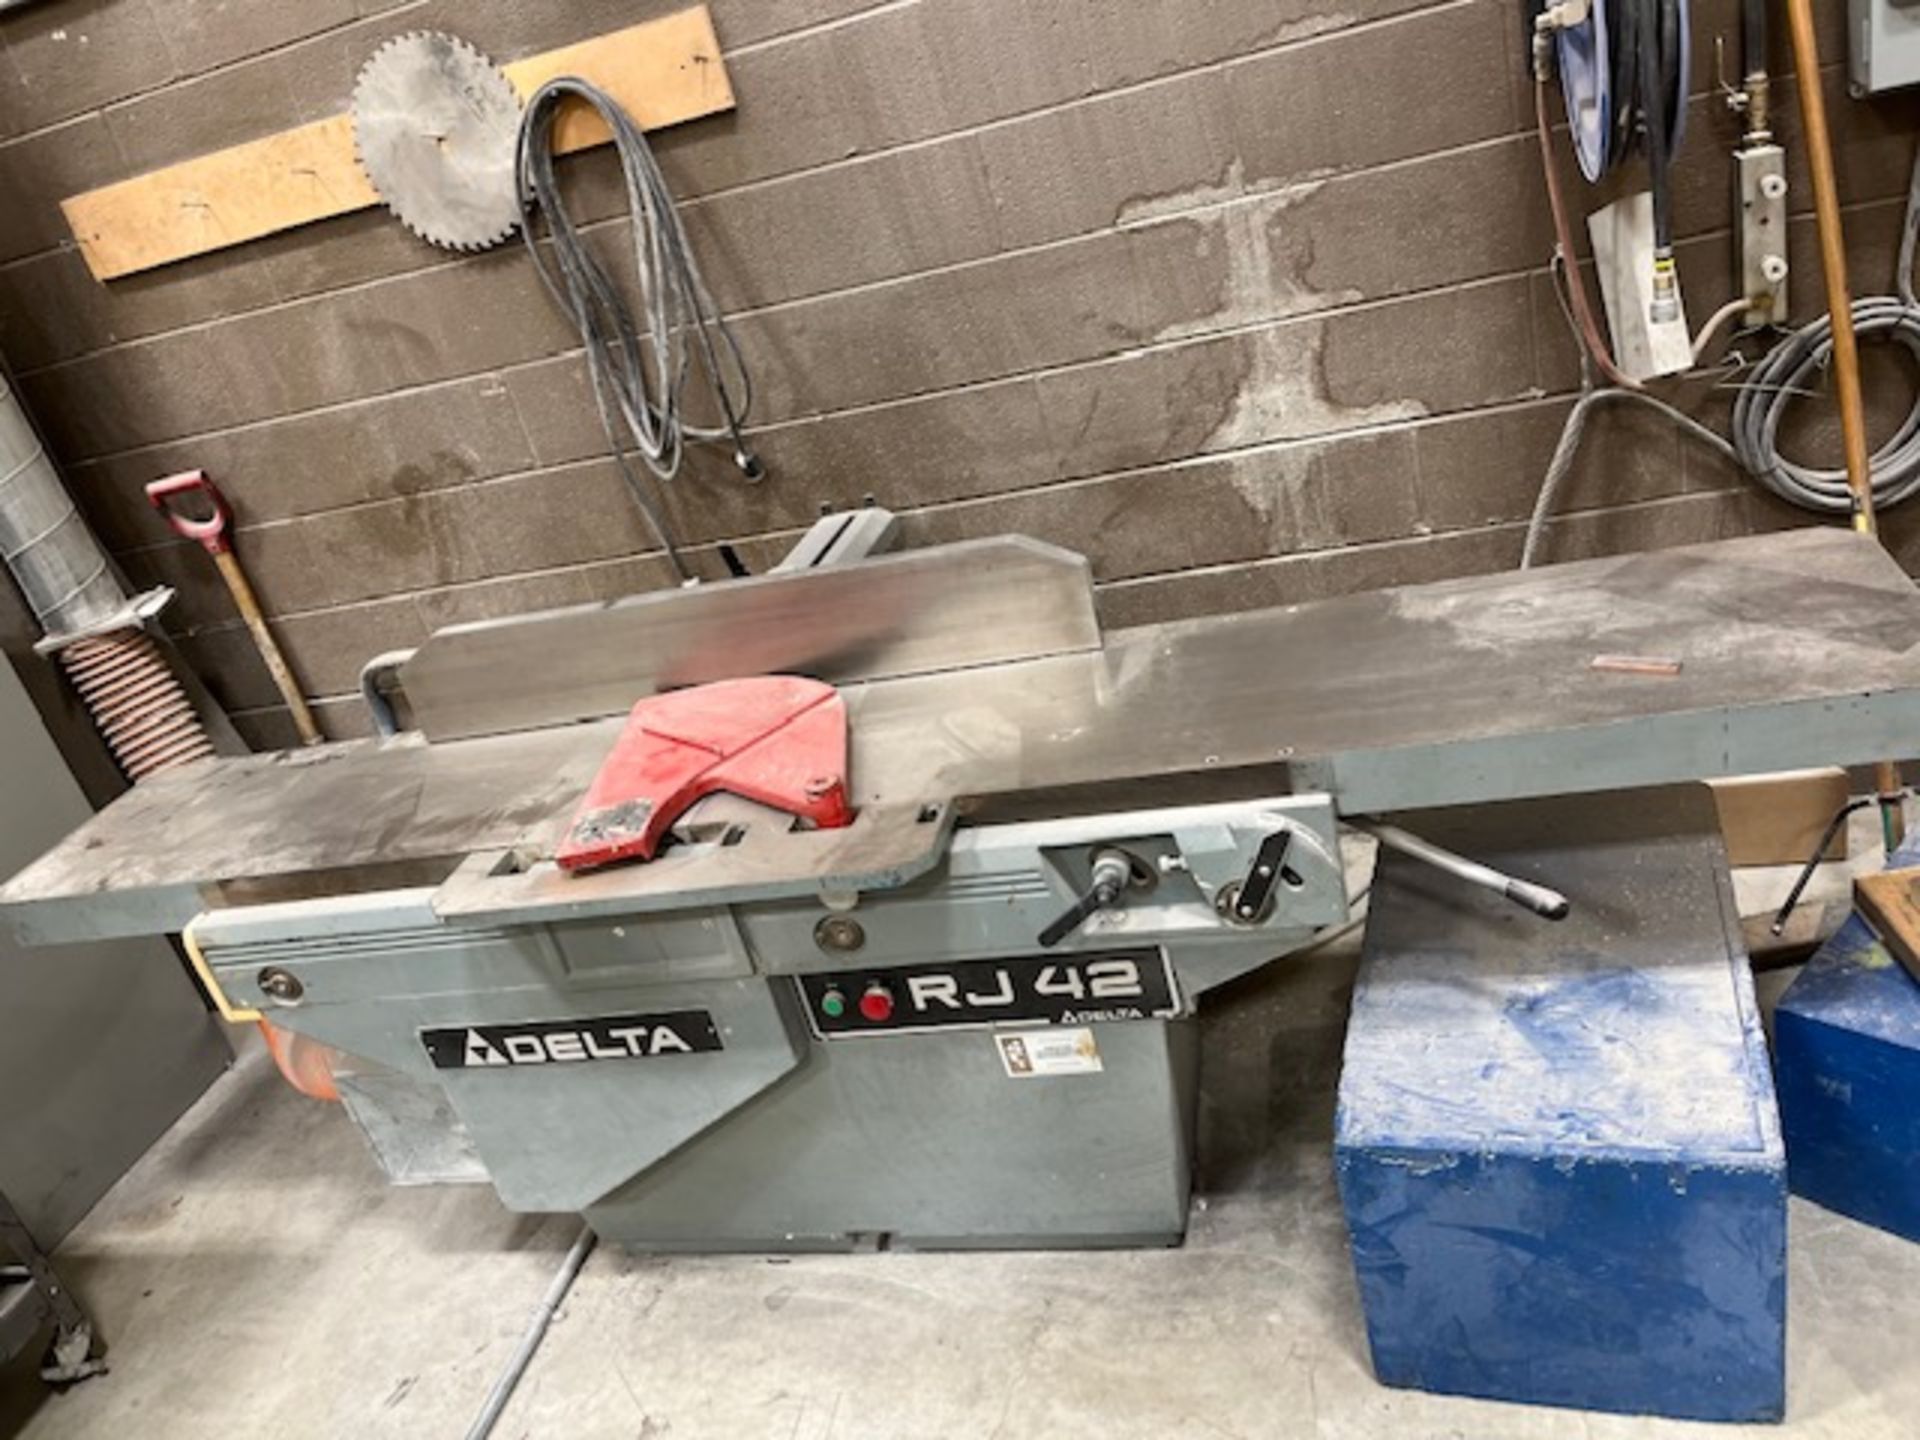 DELTA JOINTER, WDTH 16'', 5HP, SPIRAL CUTTING HEAD 4KNIVES, 230V/3PH/60C, LOCATION, WINDSOR, ONTARIO - Image 2 of 2